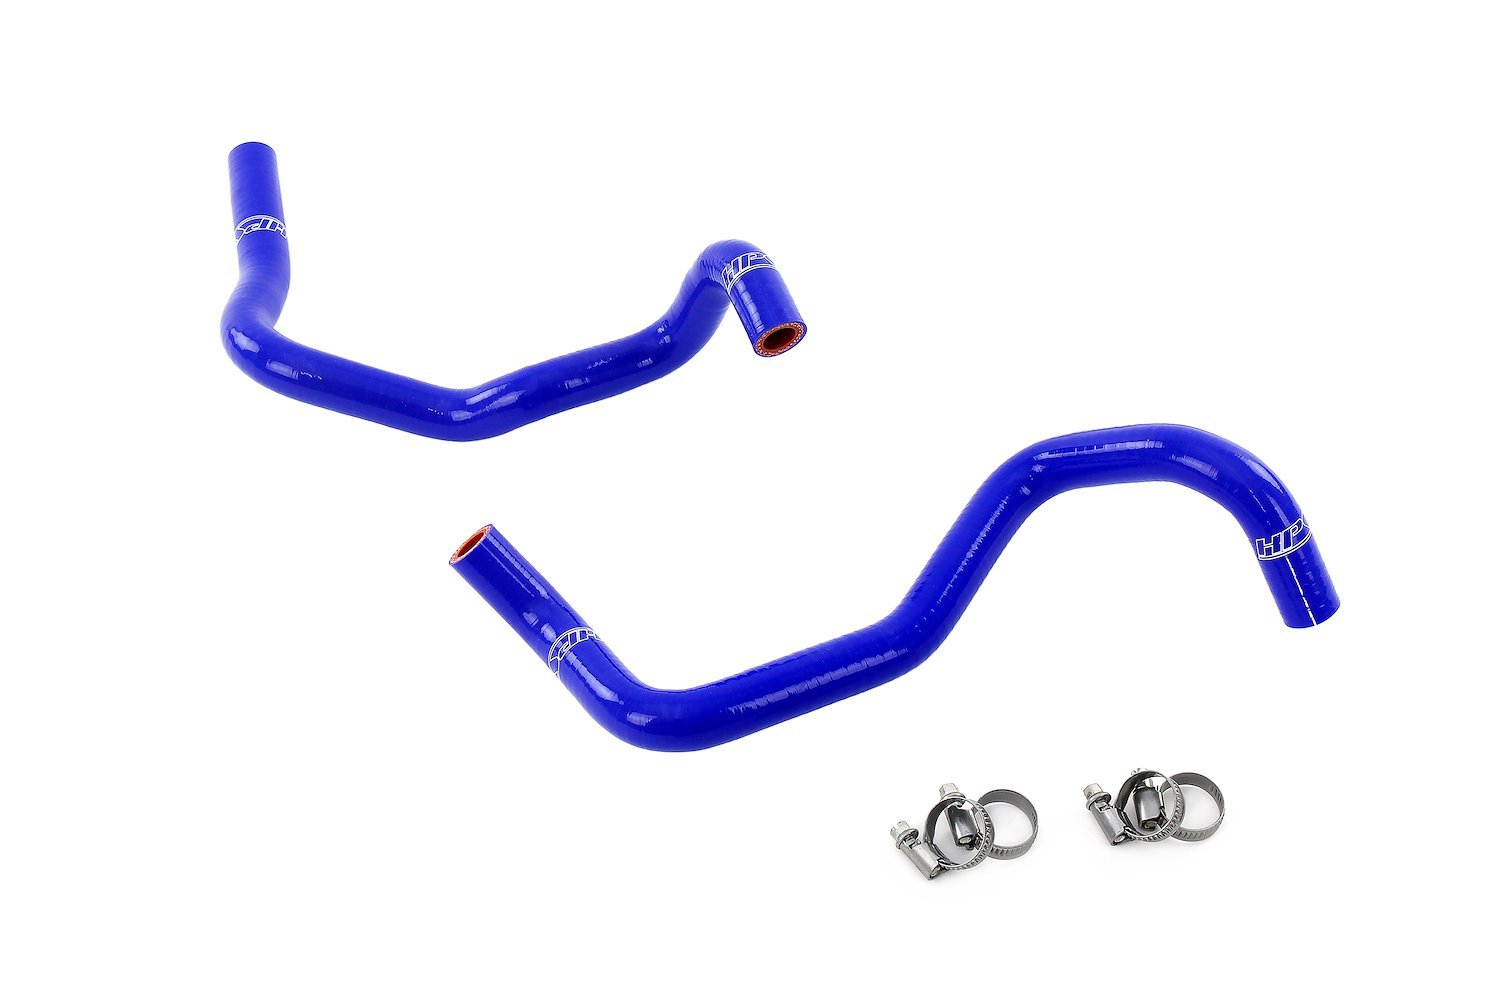 57-2131H-BLUE Heater Hose Kit, High-Temp 3-Ply Reinforced Silicone, Replaces OEM Rubber Heater Hoses